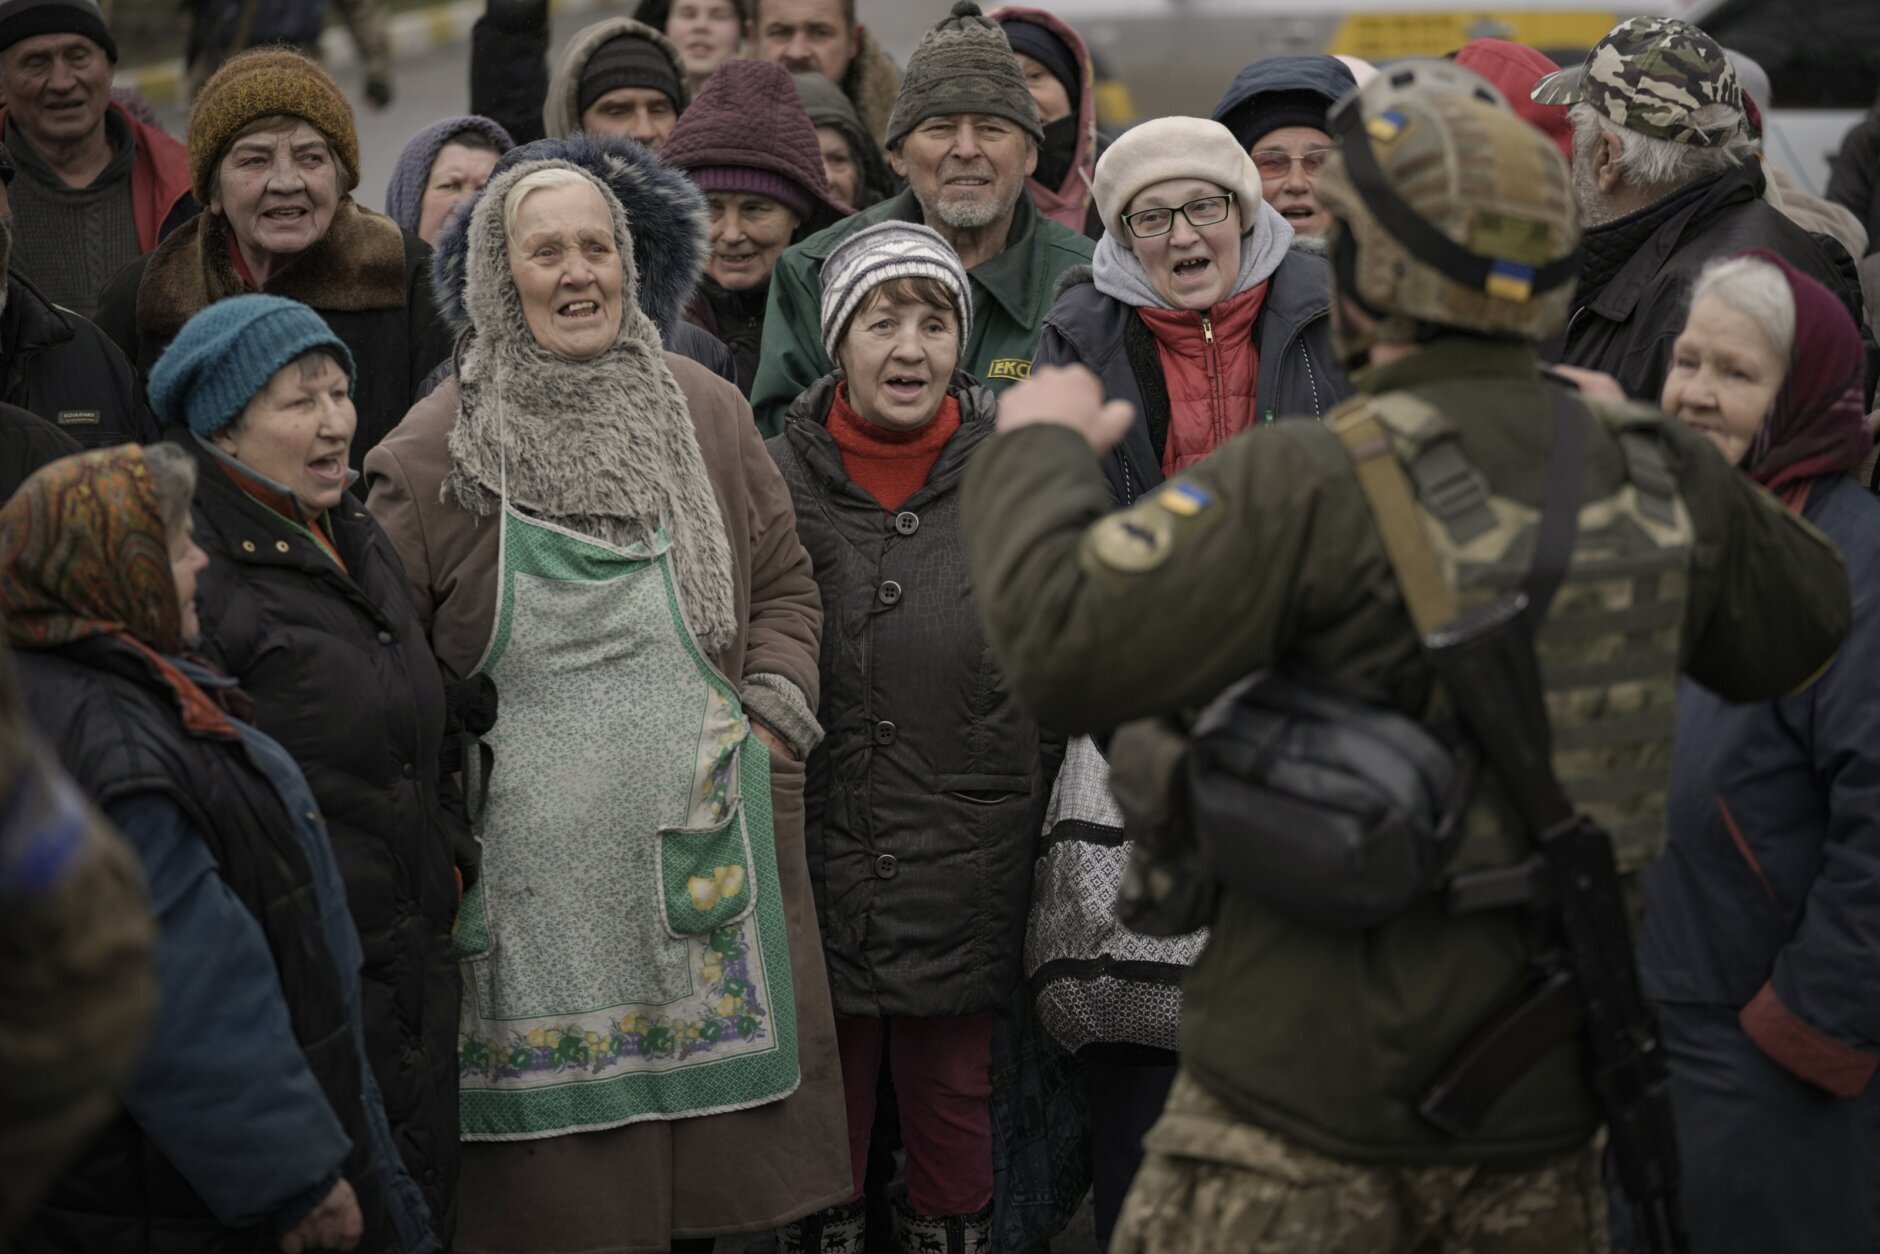 Civilians cheer along with a Ukrainian serviceman as a convoy of military and aid vehicles arrives in the formerly Russian-occupied Kyiv suburb of Bucha, Ukraine, Saturday, April 2, 2022. (AP Photo/Vadim Ghirda)